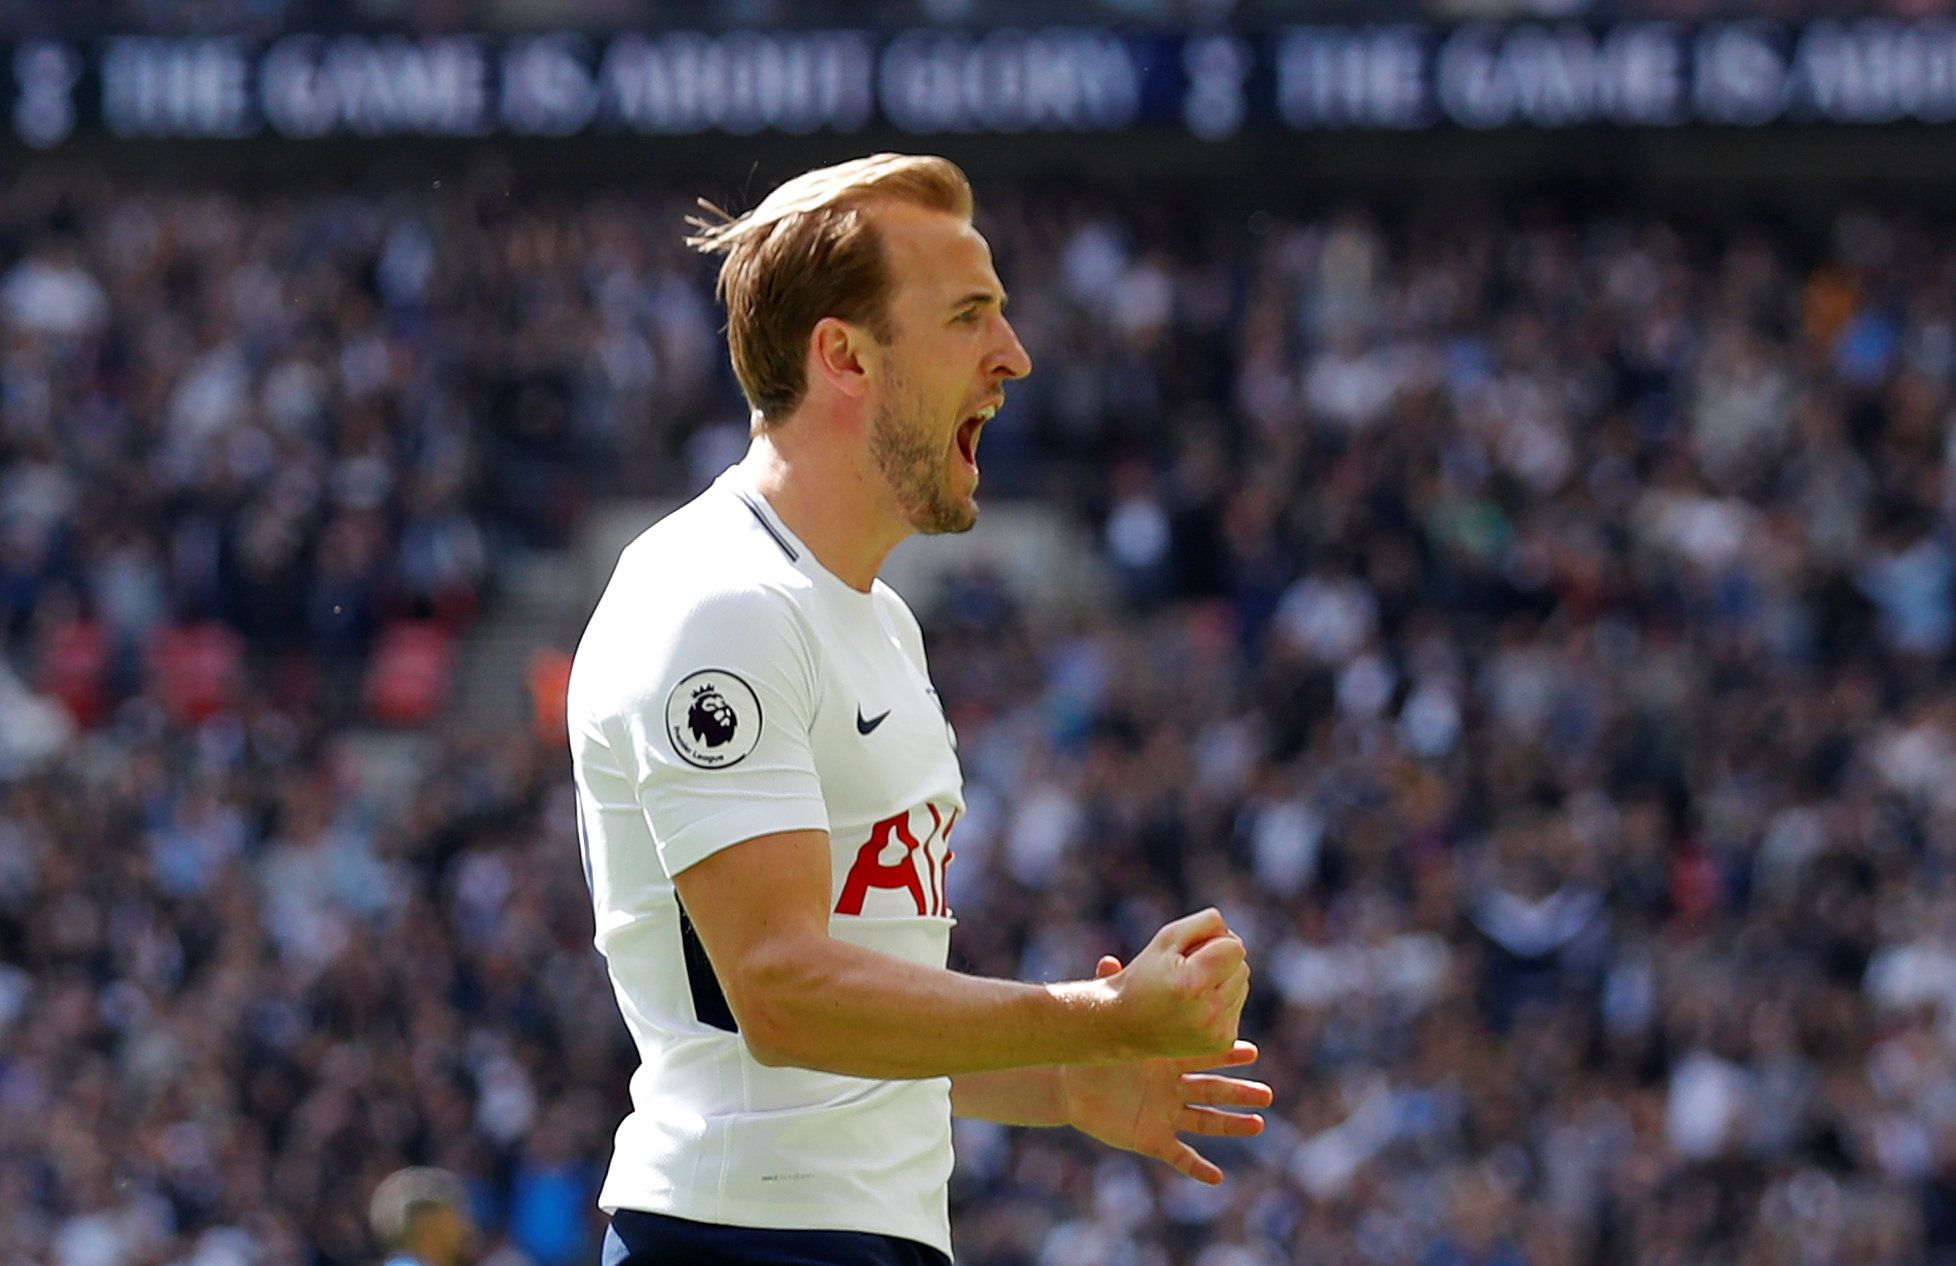 Soccer Football - Premier League - Tottenham Hotspur vs Leicester City - Wembley Stadium, London, Britain - May 13, 2018   Tottenham's Harry Kane celebrates scoring their first goal    Action Images via Reuters/Andrew Couldridge    EDITORIAL USE ONLY. No use with unauthorized audio, video, data, fixture lists, club/league logos or "live" services. Online in-match use limited to 75 images, no video emulation. No use in betting, games or single club/league/player publications.  Please contact your